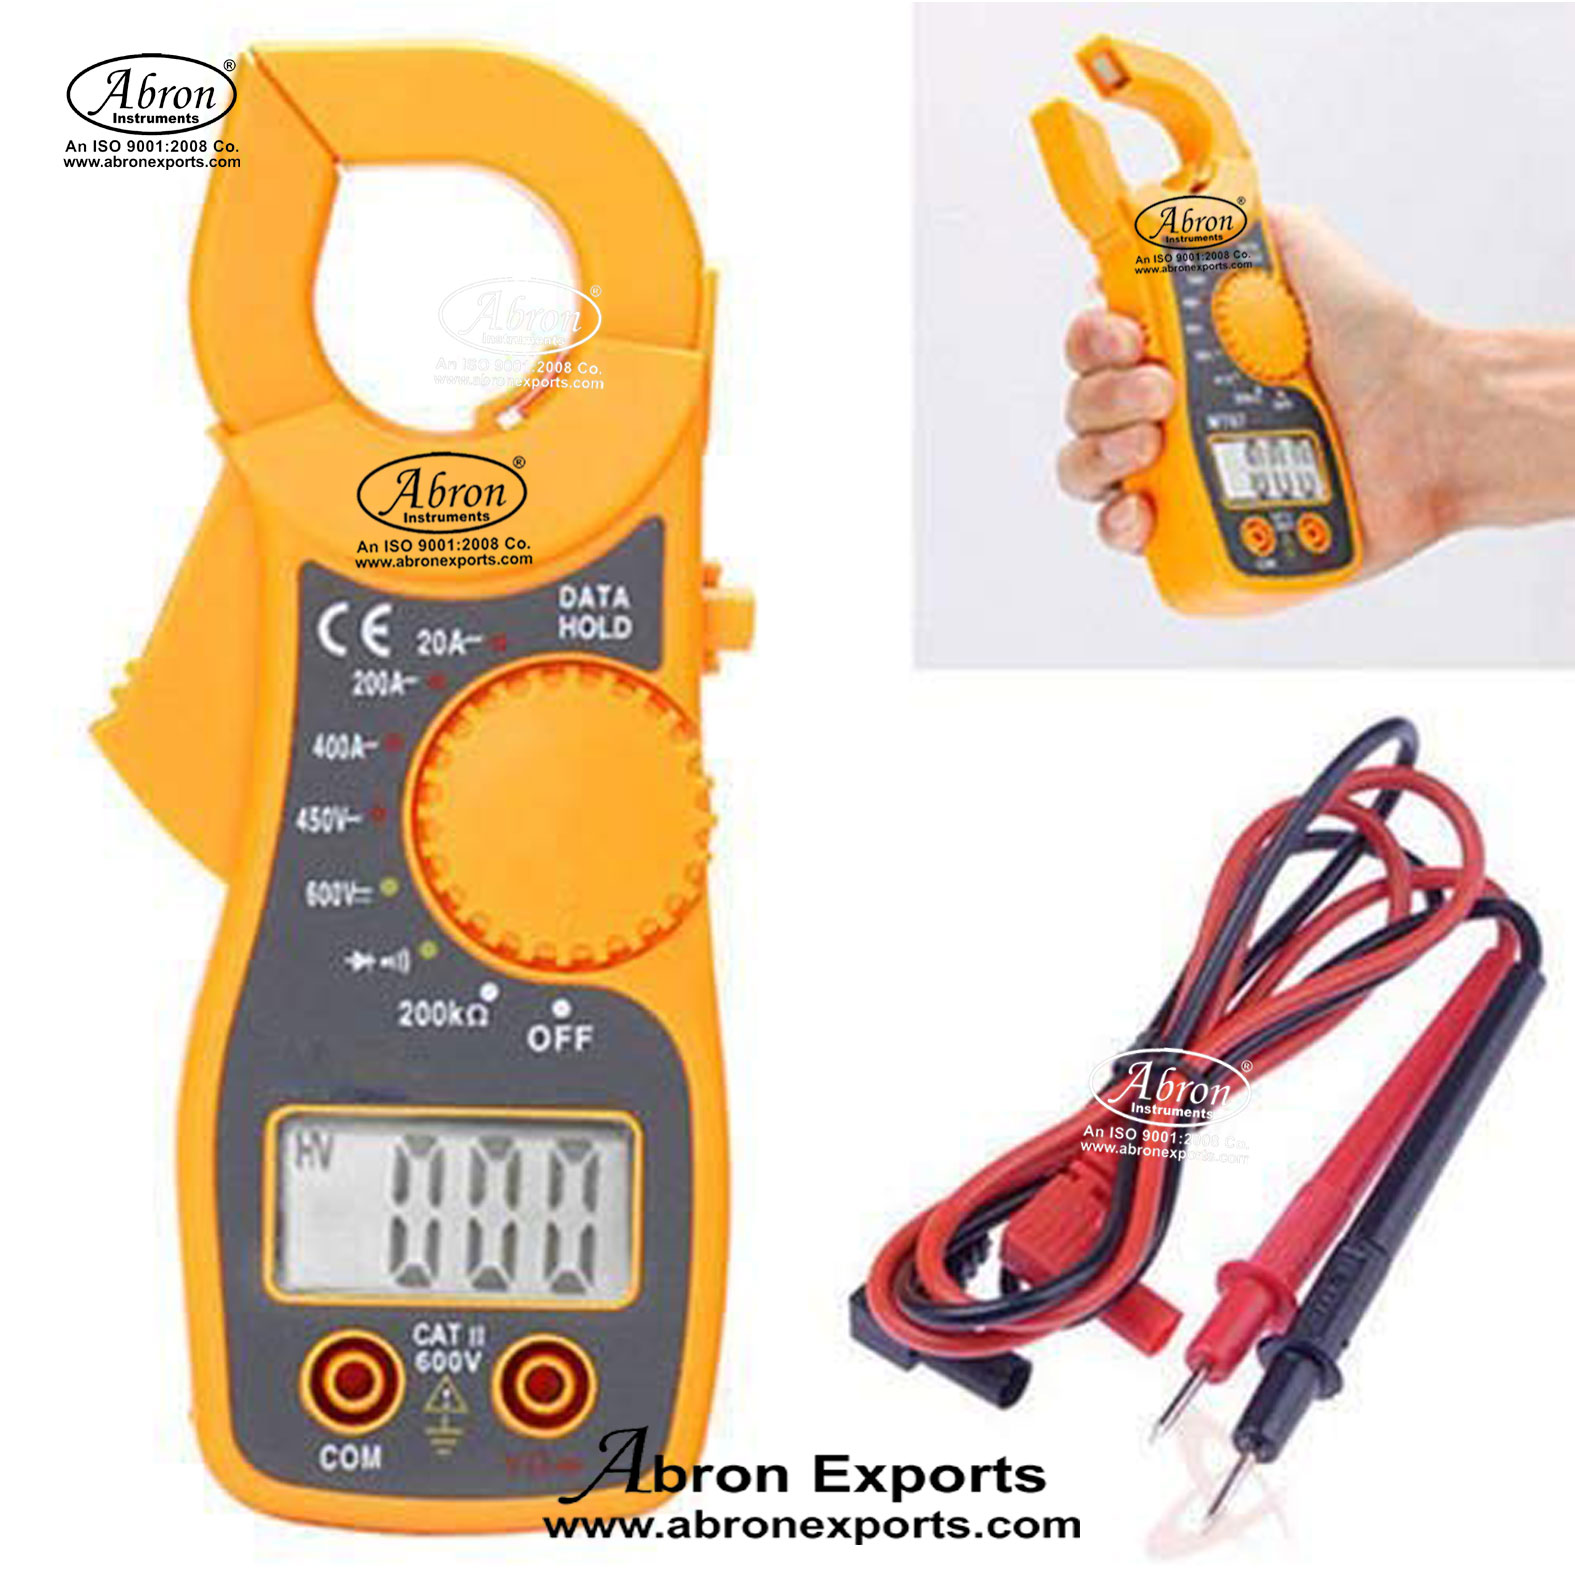 Meter Clamp On Portable LCD Digital Clamp Ampere AC DC Voltage Multi Meter Current OHM Tester Abron AE-1313AMP